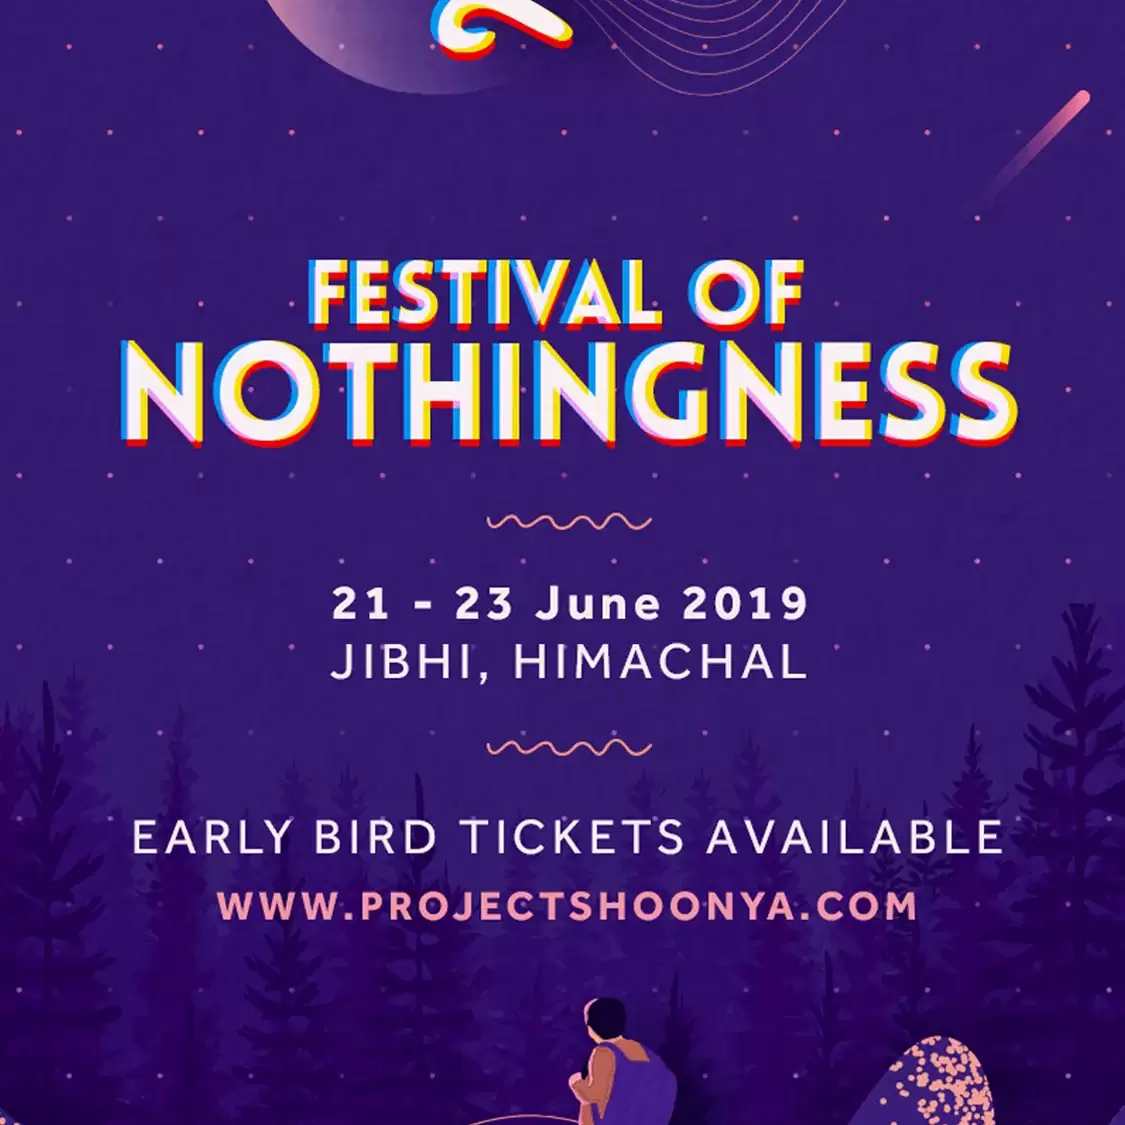 Join us at Shoonya for the Festival of Nothingness 2019!